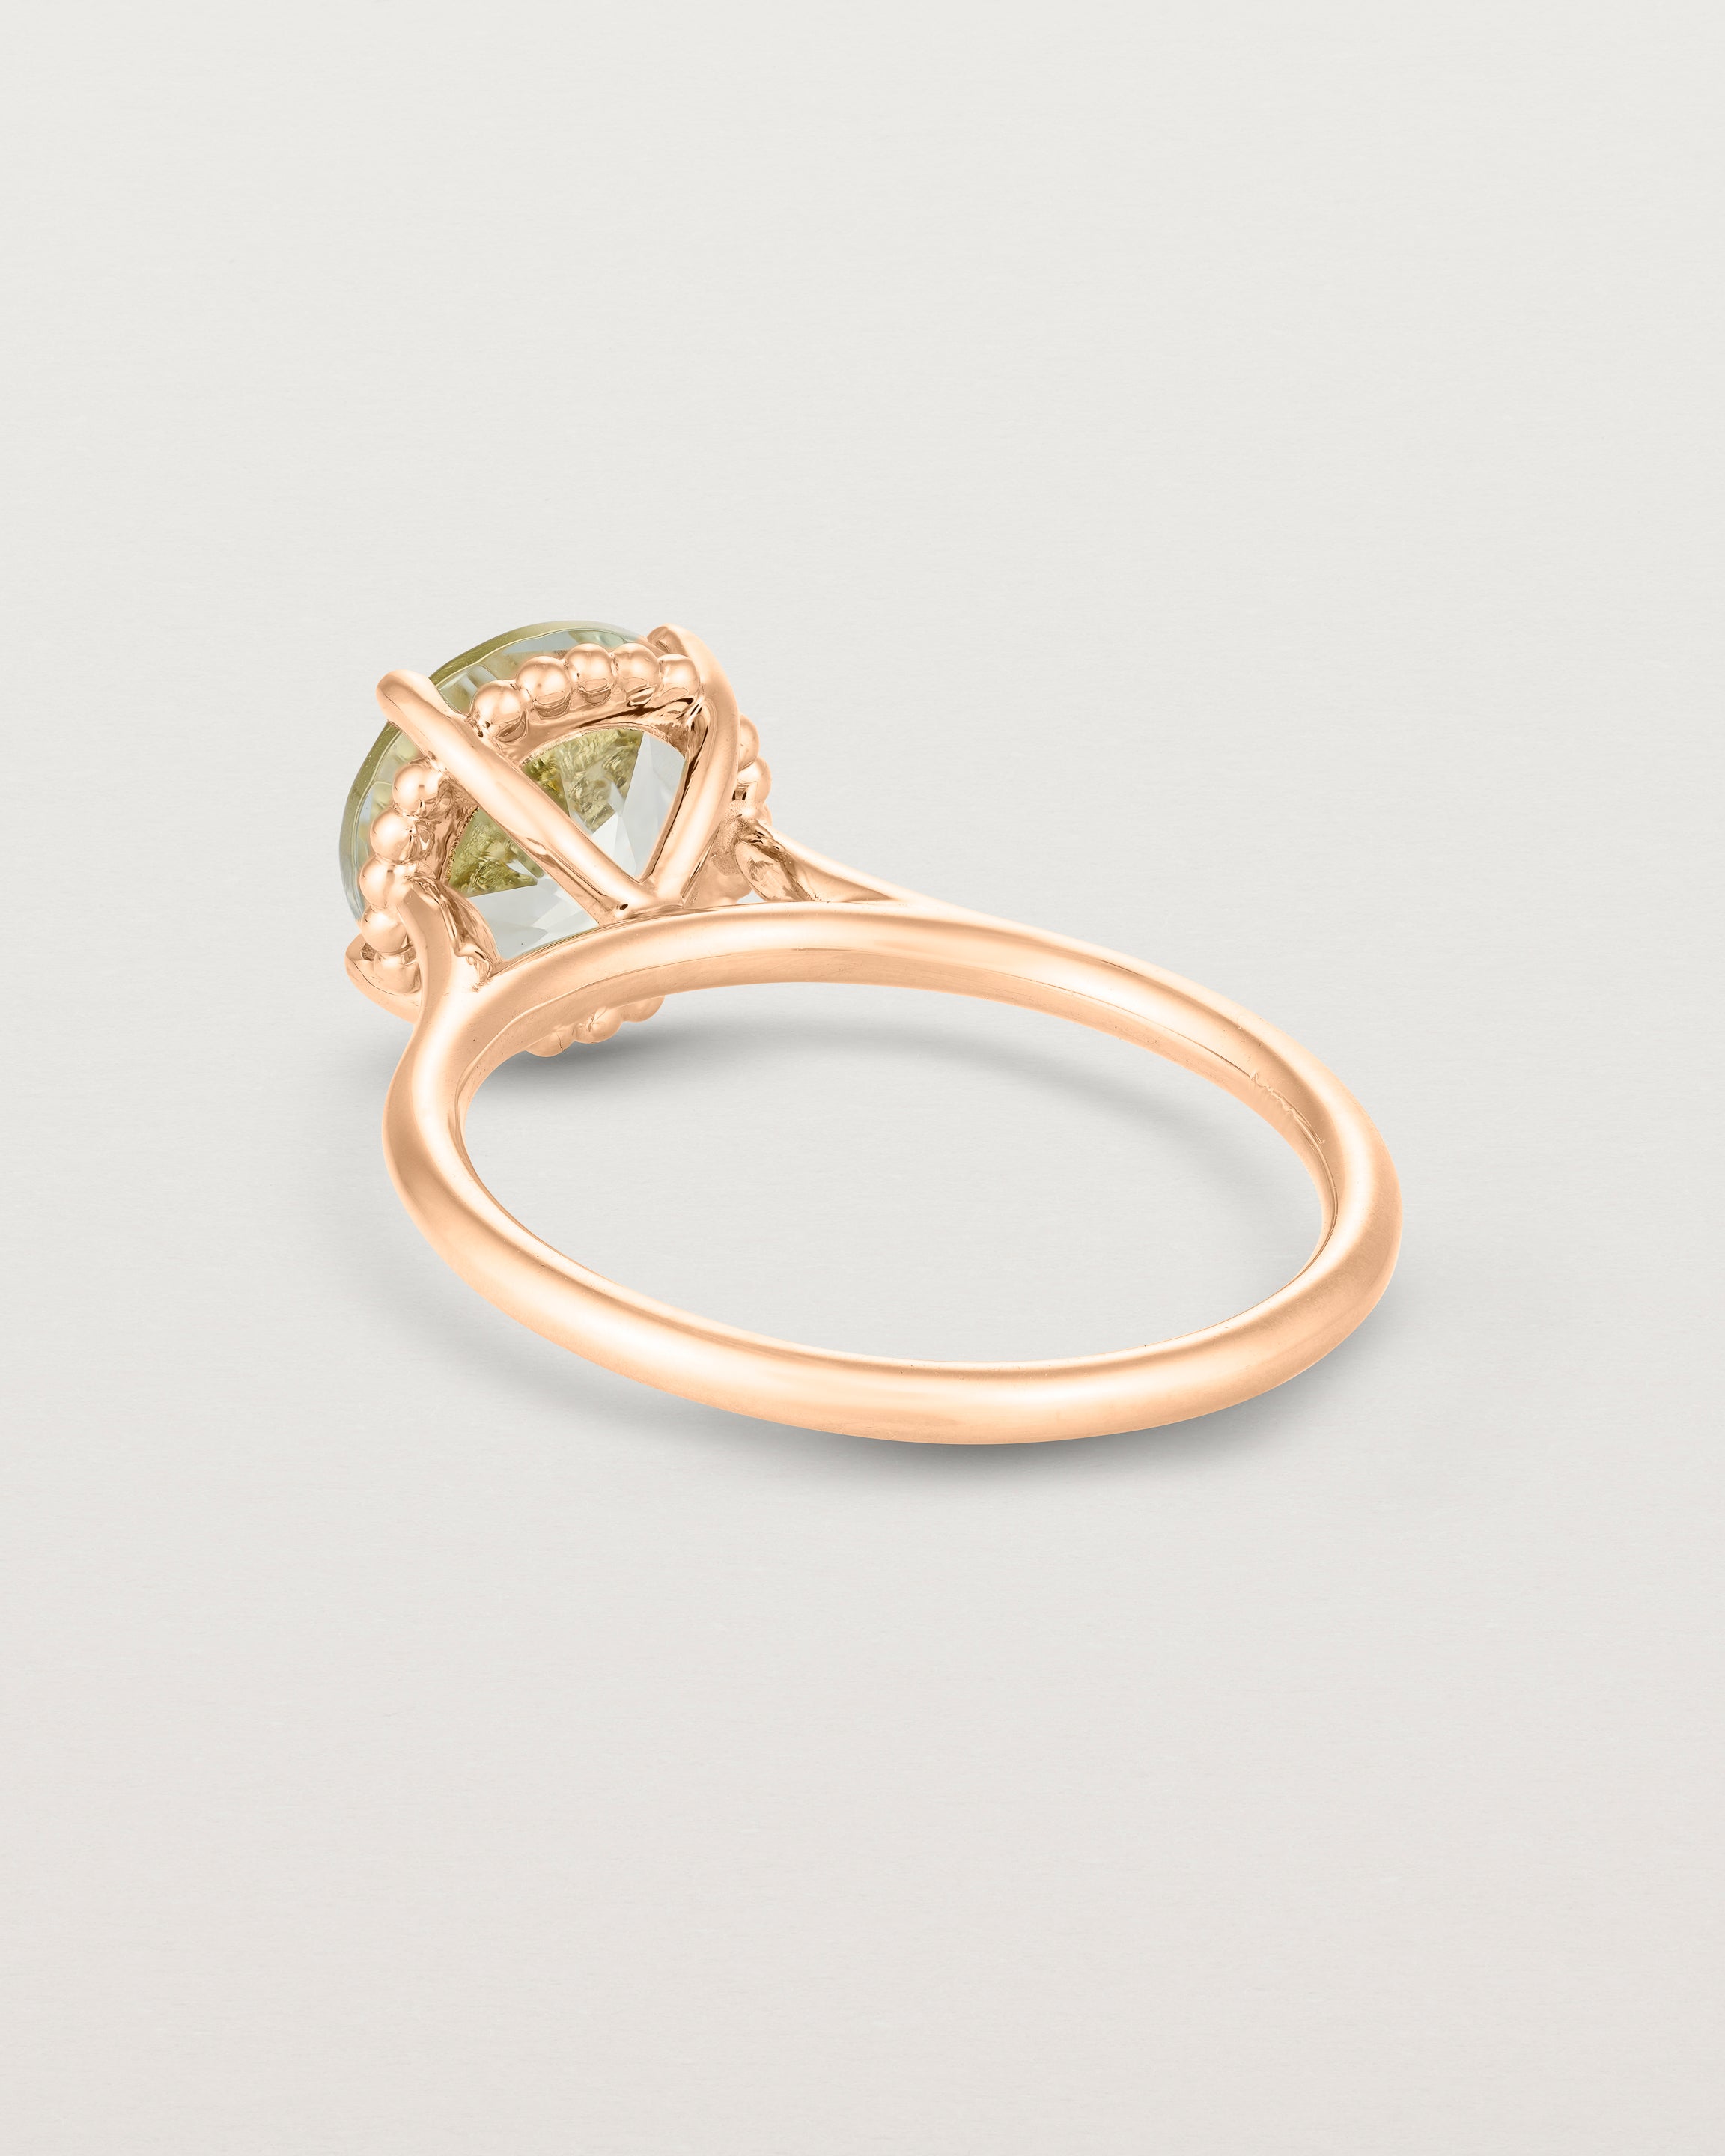 Back view of the Thea Round Solitaire | Green Amethyst in rose gold.